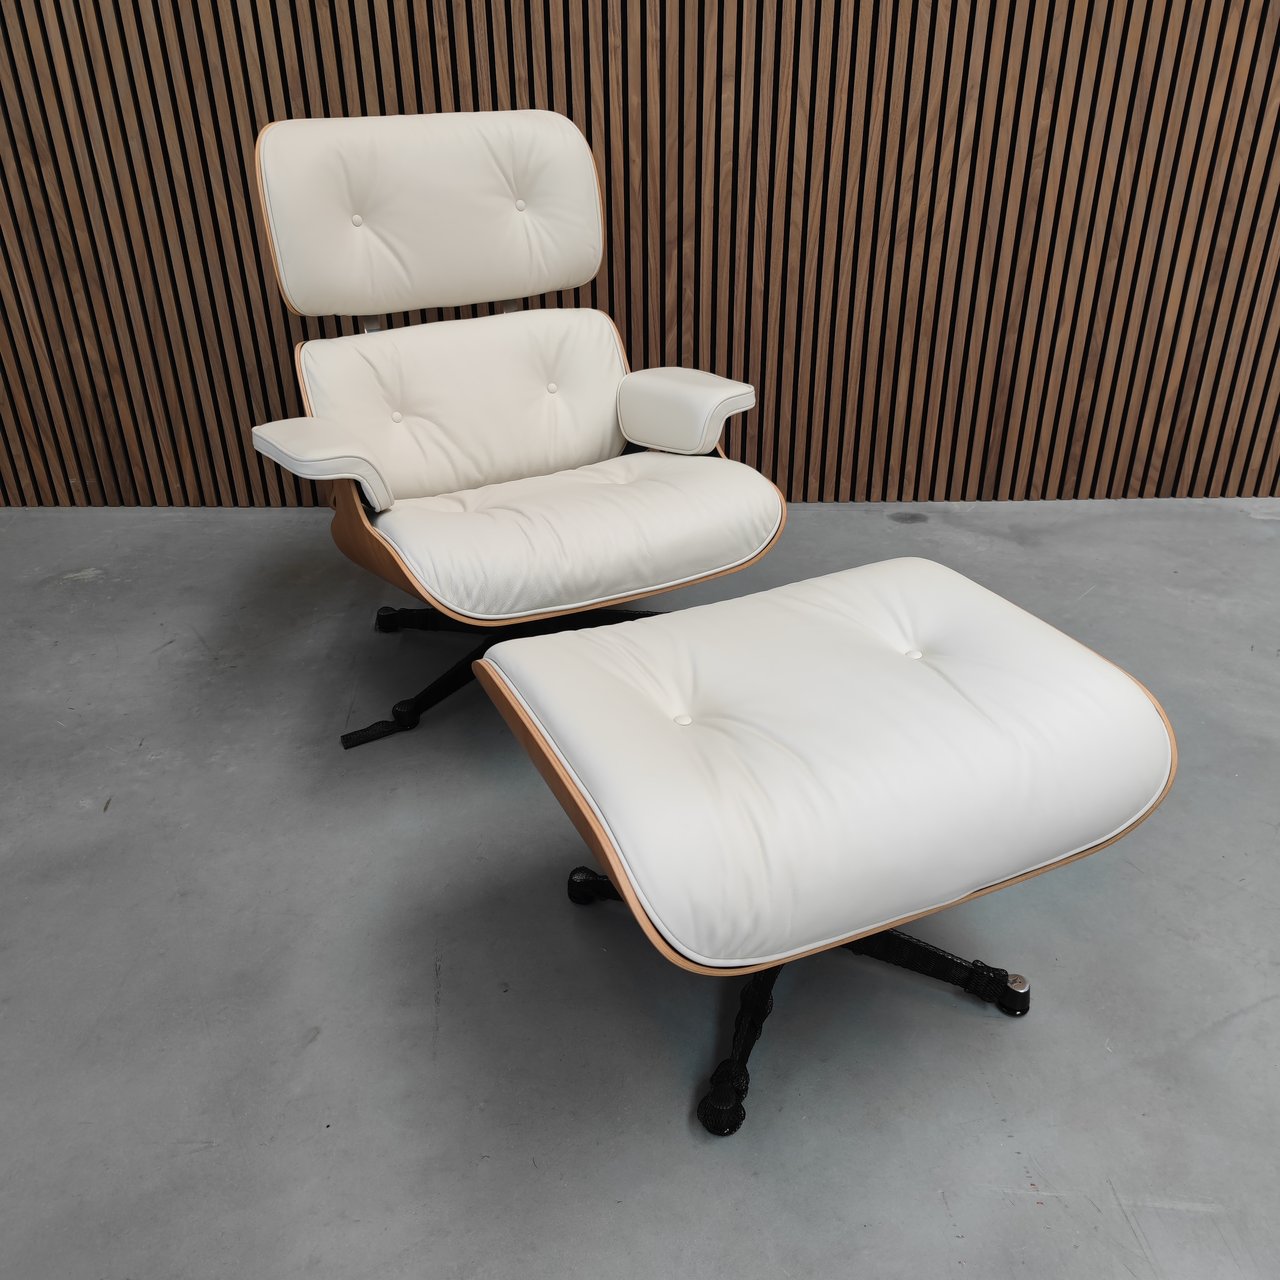 Image 1 of Vitra Eames Lounge Chair